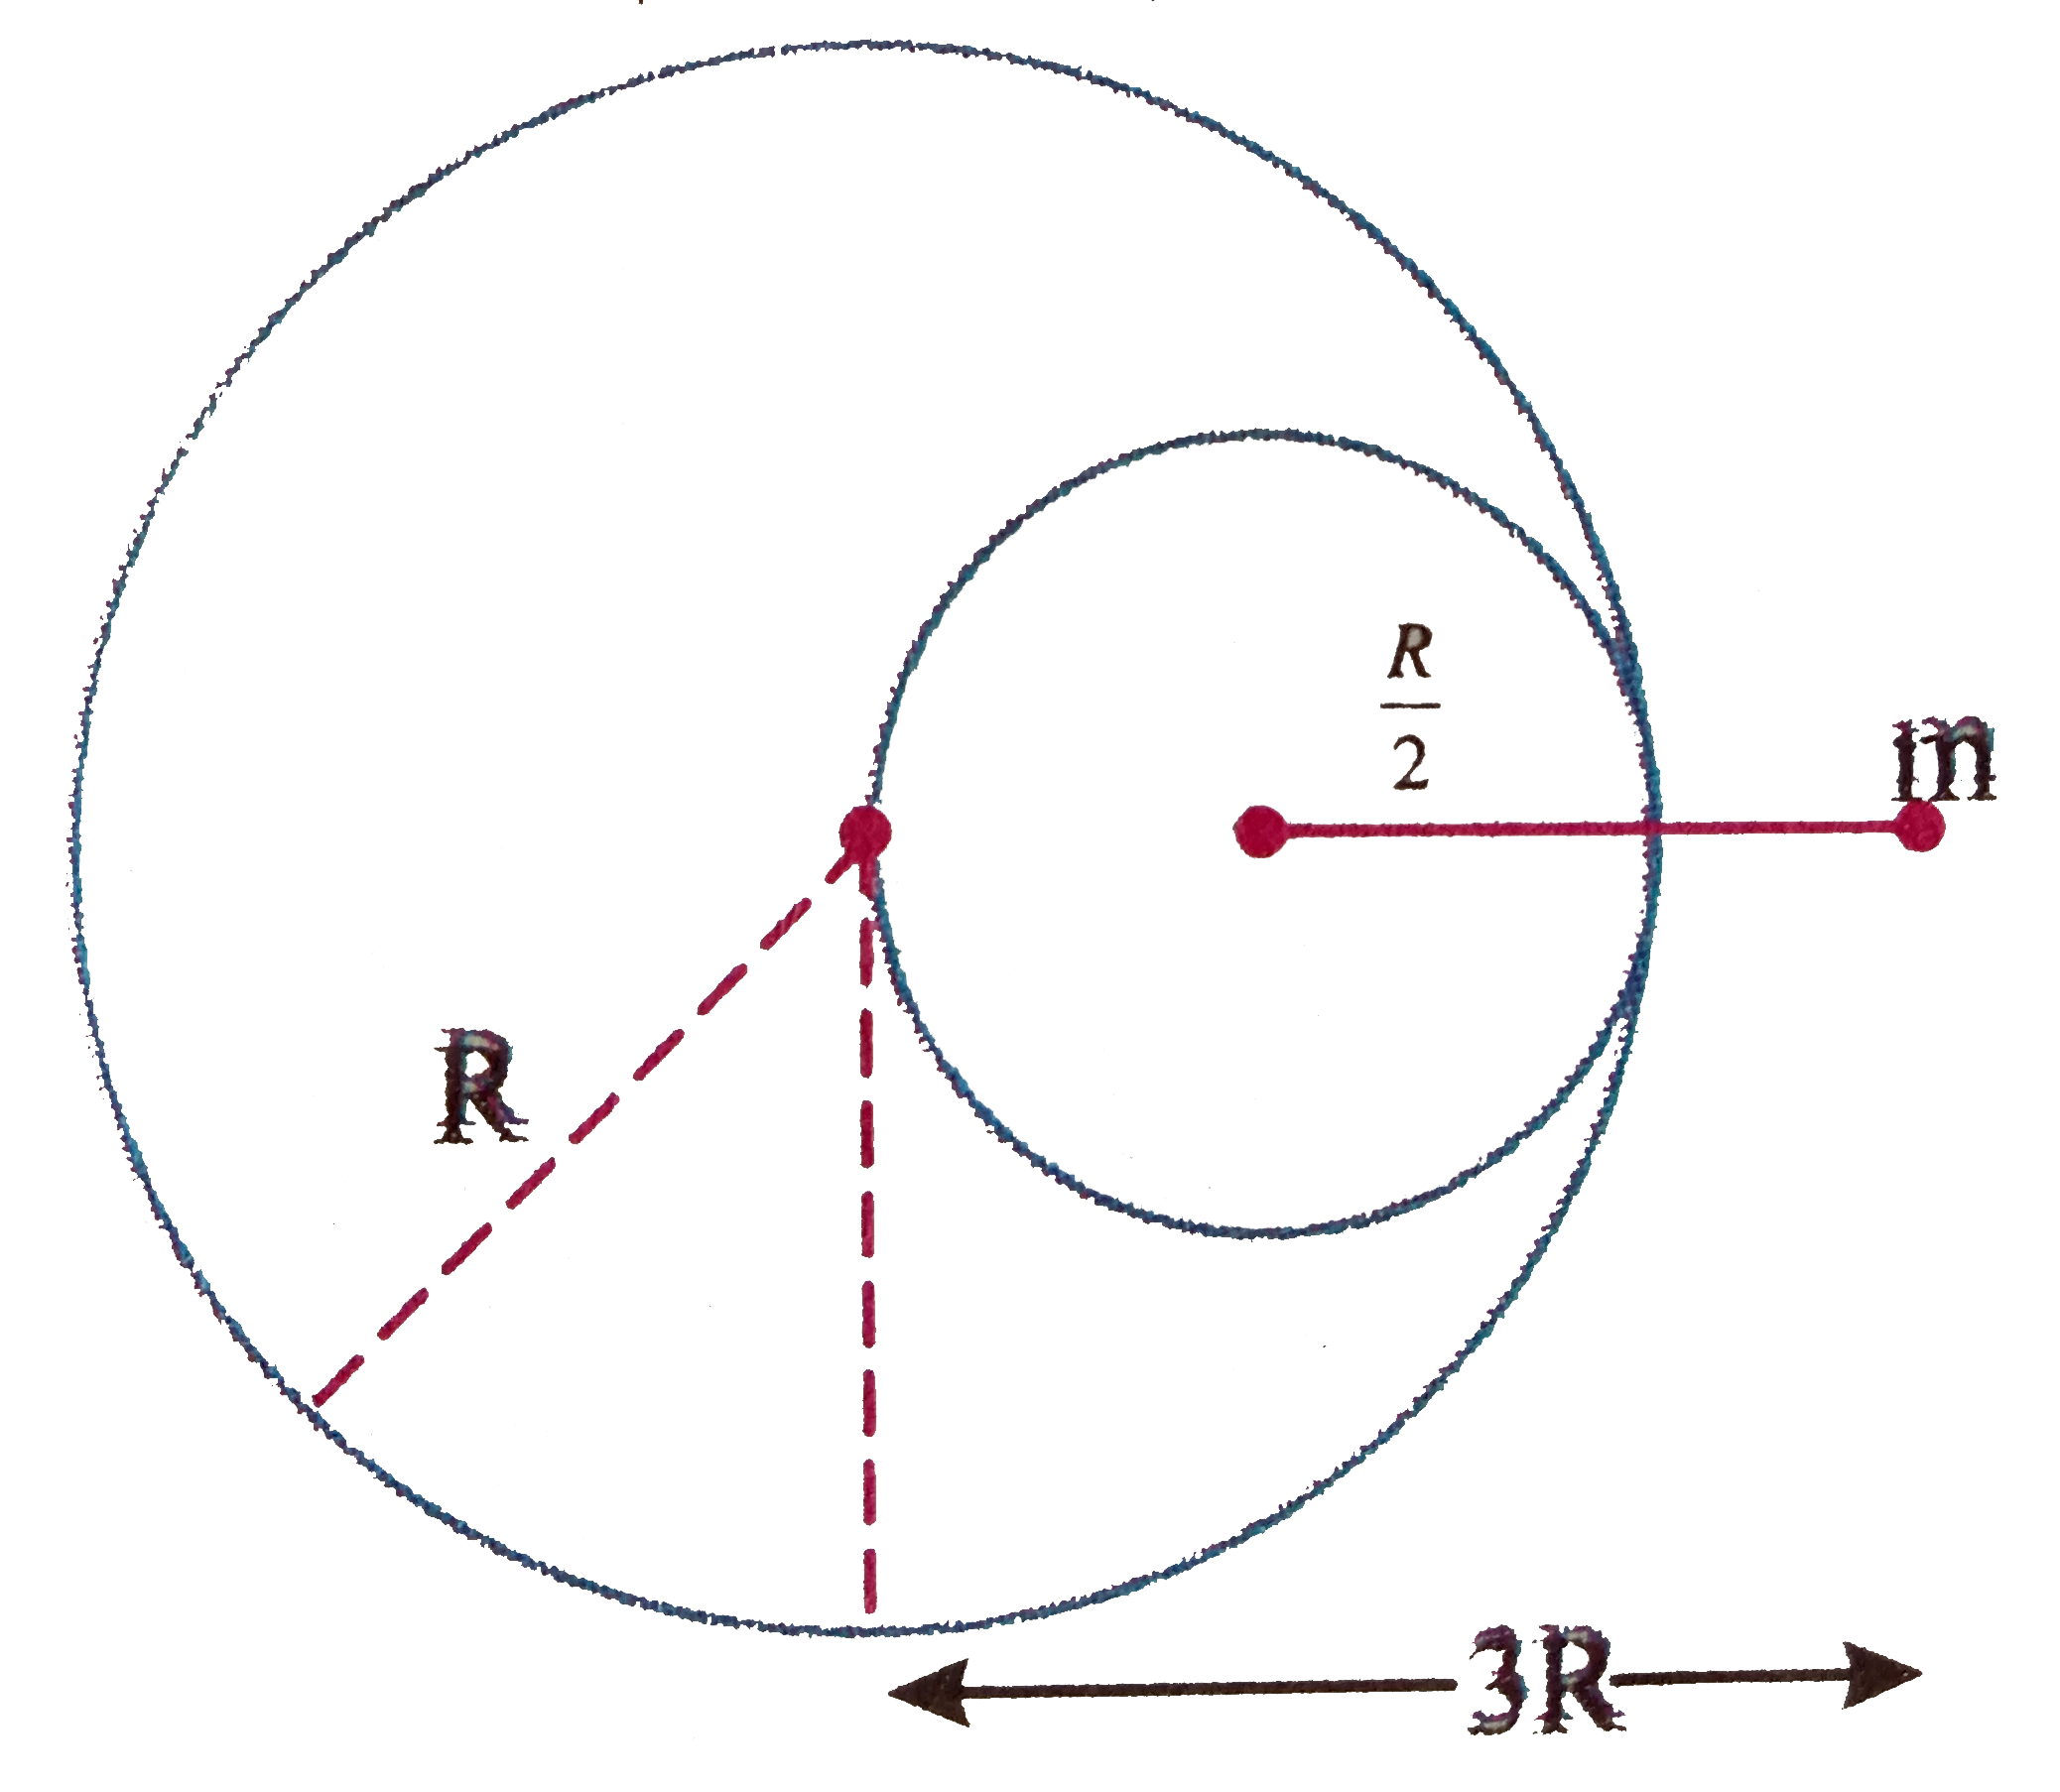 The gravitational force acting on a particle, due to a solid sphere of uniform density and radius R, at a distance of 3R from the centre of the sphere is F1. A spherical hole of radius (R//2) is now made in the sphere as shown in diagram. The sphere with hole now exerts a force F2 on the same particle. ratio of F1 to F2 is